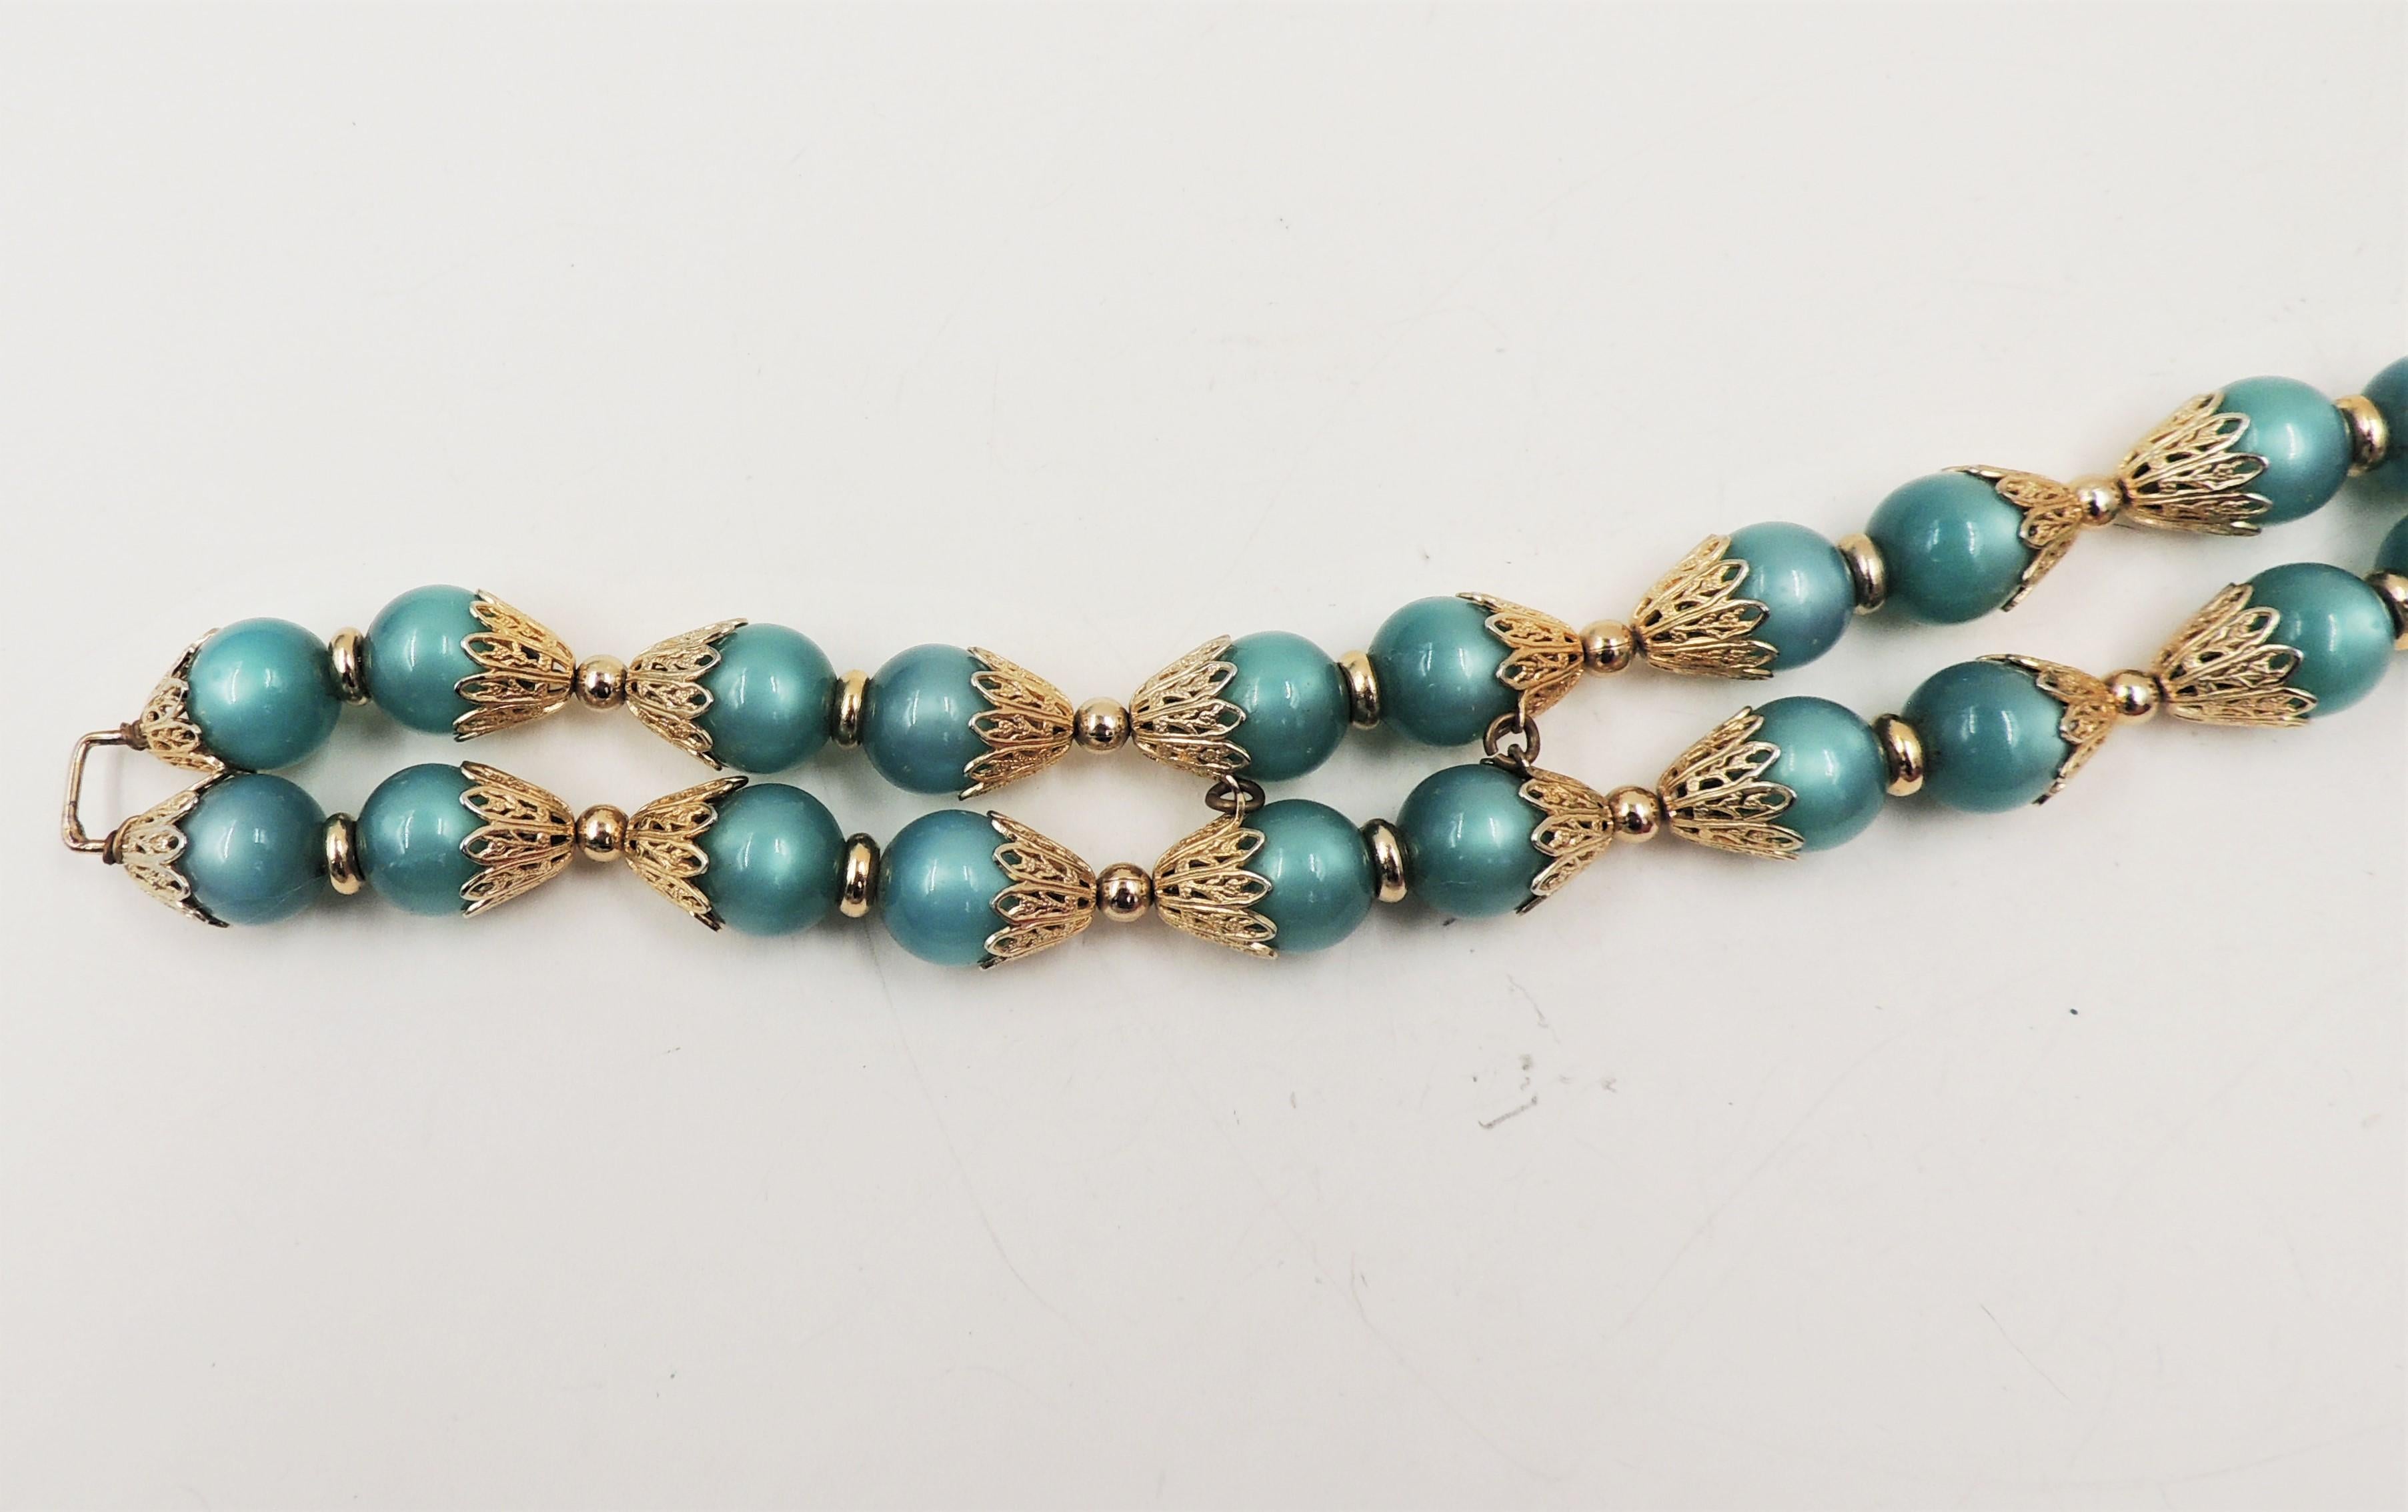 1950s goldtone filigree with green resin moonglow beaded two strand bracelet with fold over clasp. Marked 